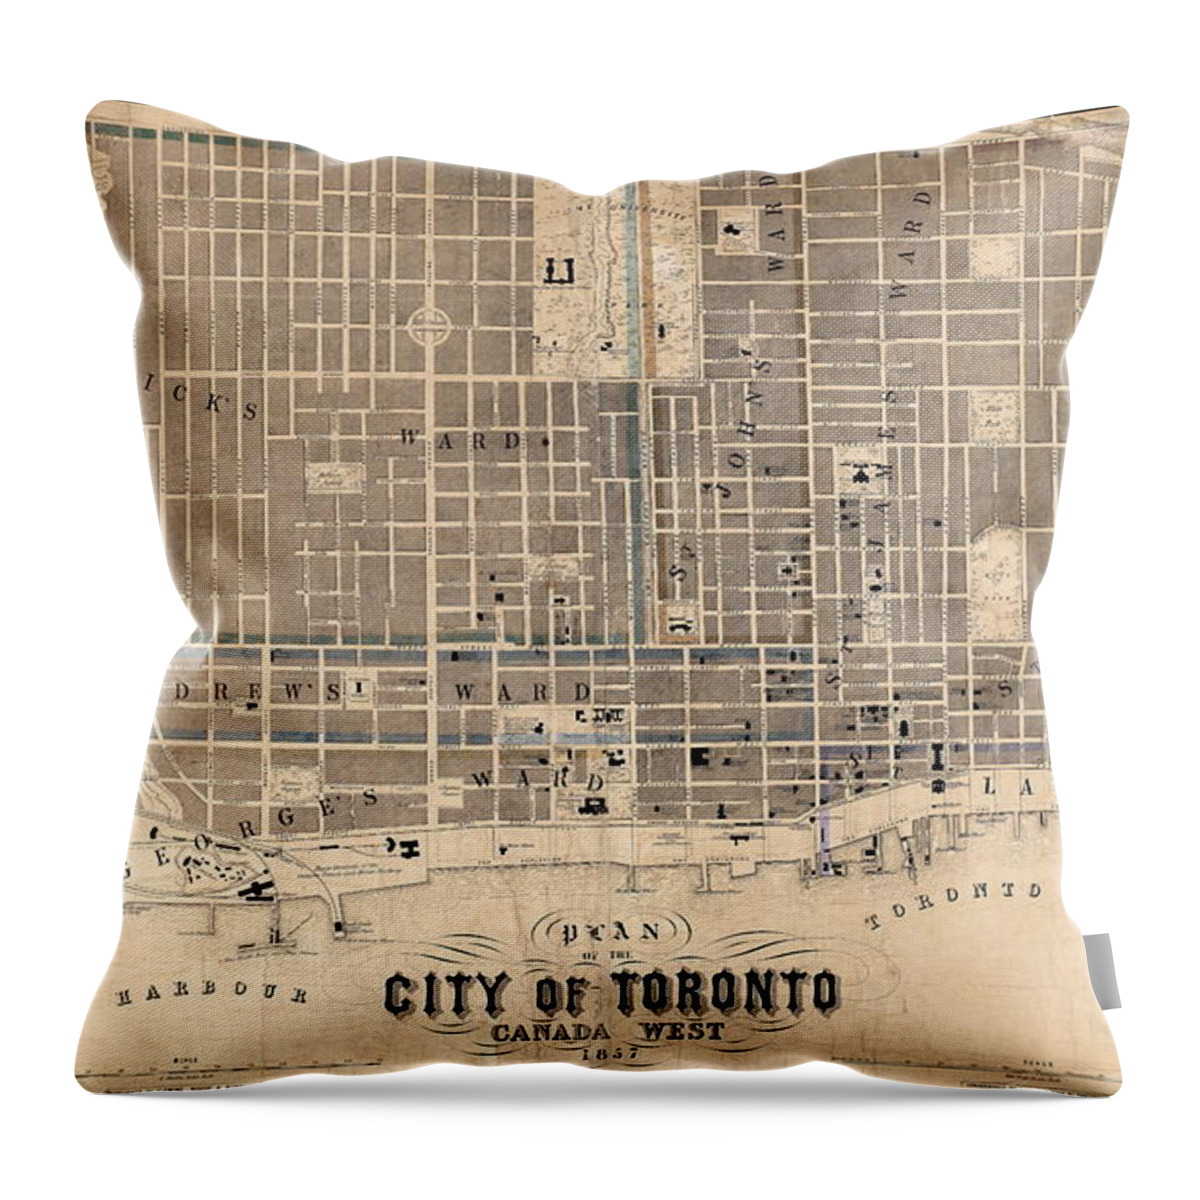 Antique Map Of The City Of Totonto Throw Pillow featuring the drawing Antique Maps - Old Cartographic maps - Antique Map of the City of Toronto, Canada, 1857 by Studio Grafiikka